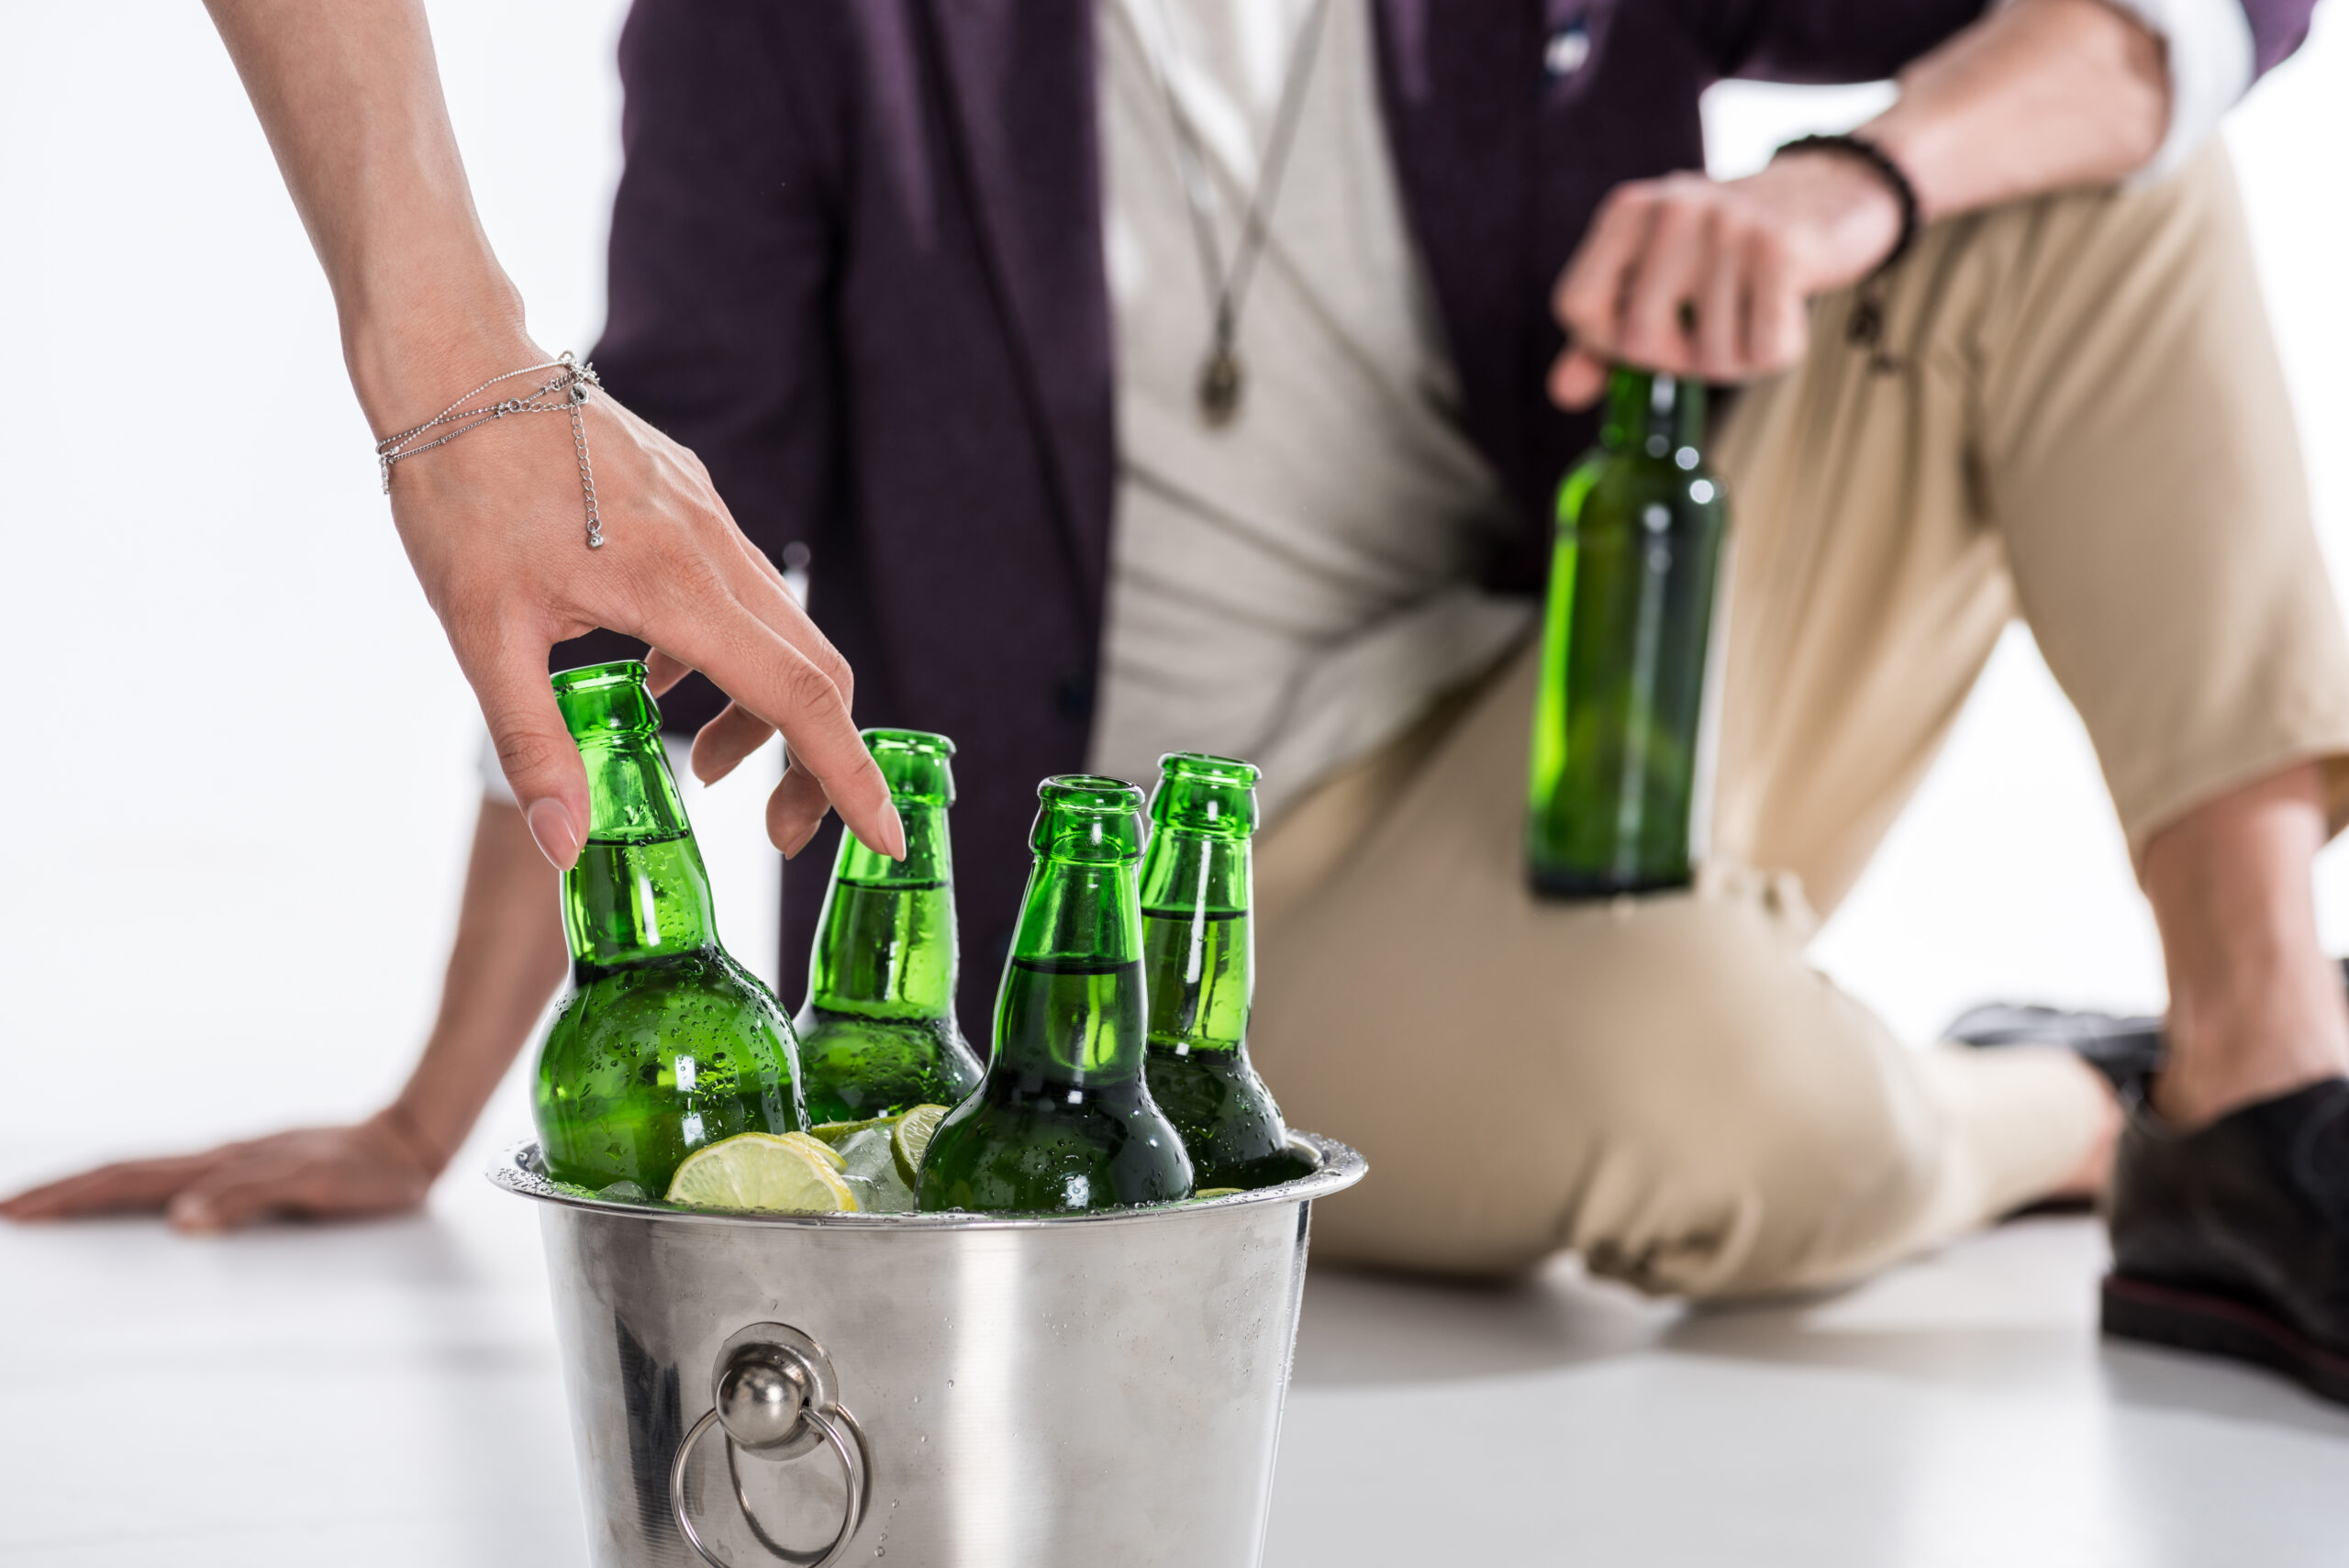 Cropped shot of people holding glass bottles and bucket full of ice and beer bottles